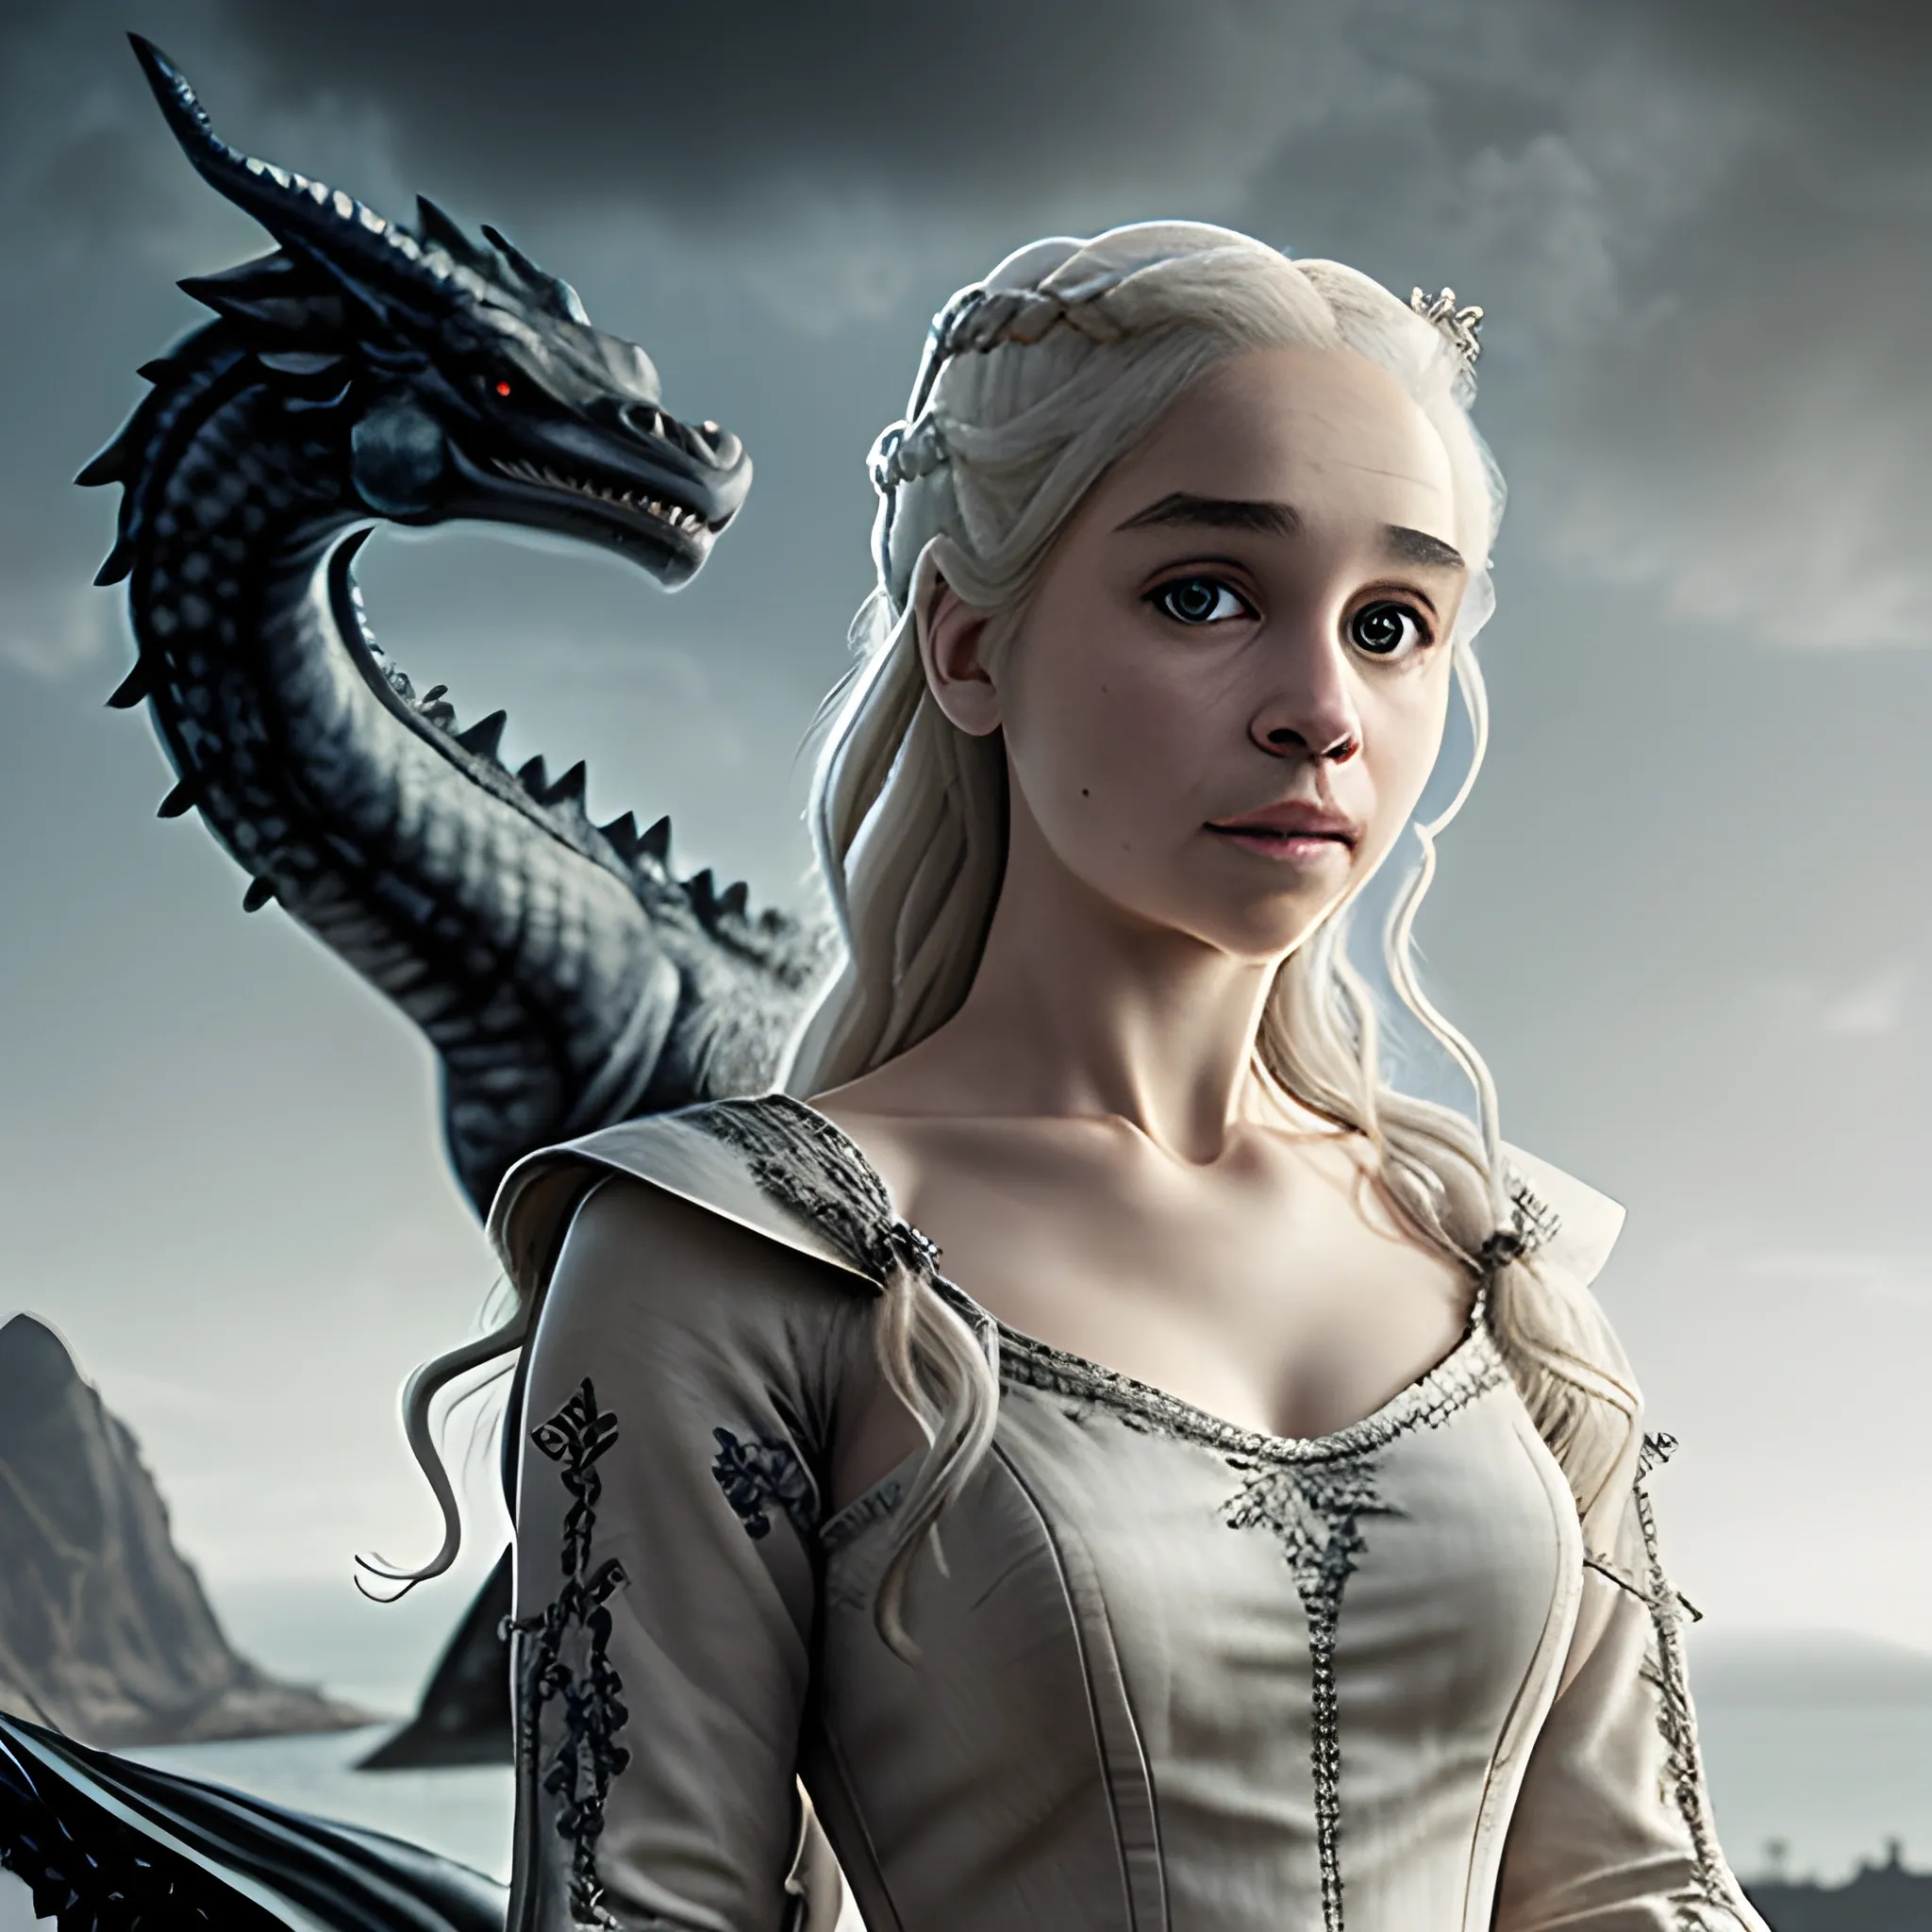 (masterpiece:1.2, best quality), (real picture, intricate details), Daenerys , solo, upper body, casual, light long hair, minimal makeup, natural fabrics, close-up face, smile, home, background dragons in the sky